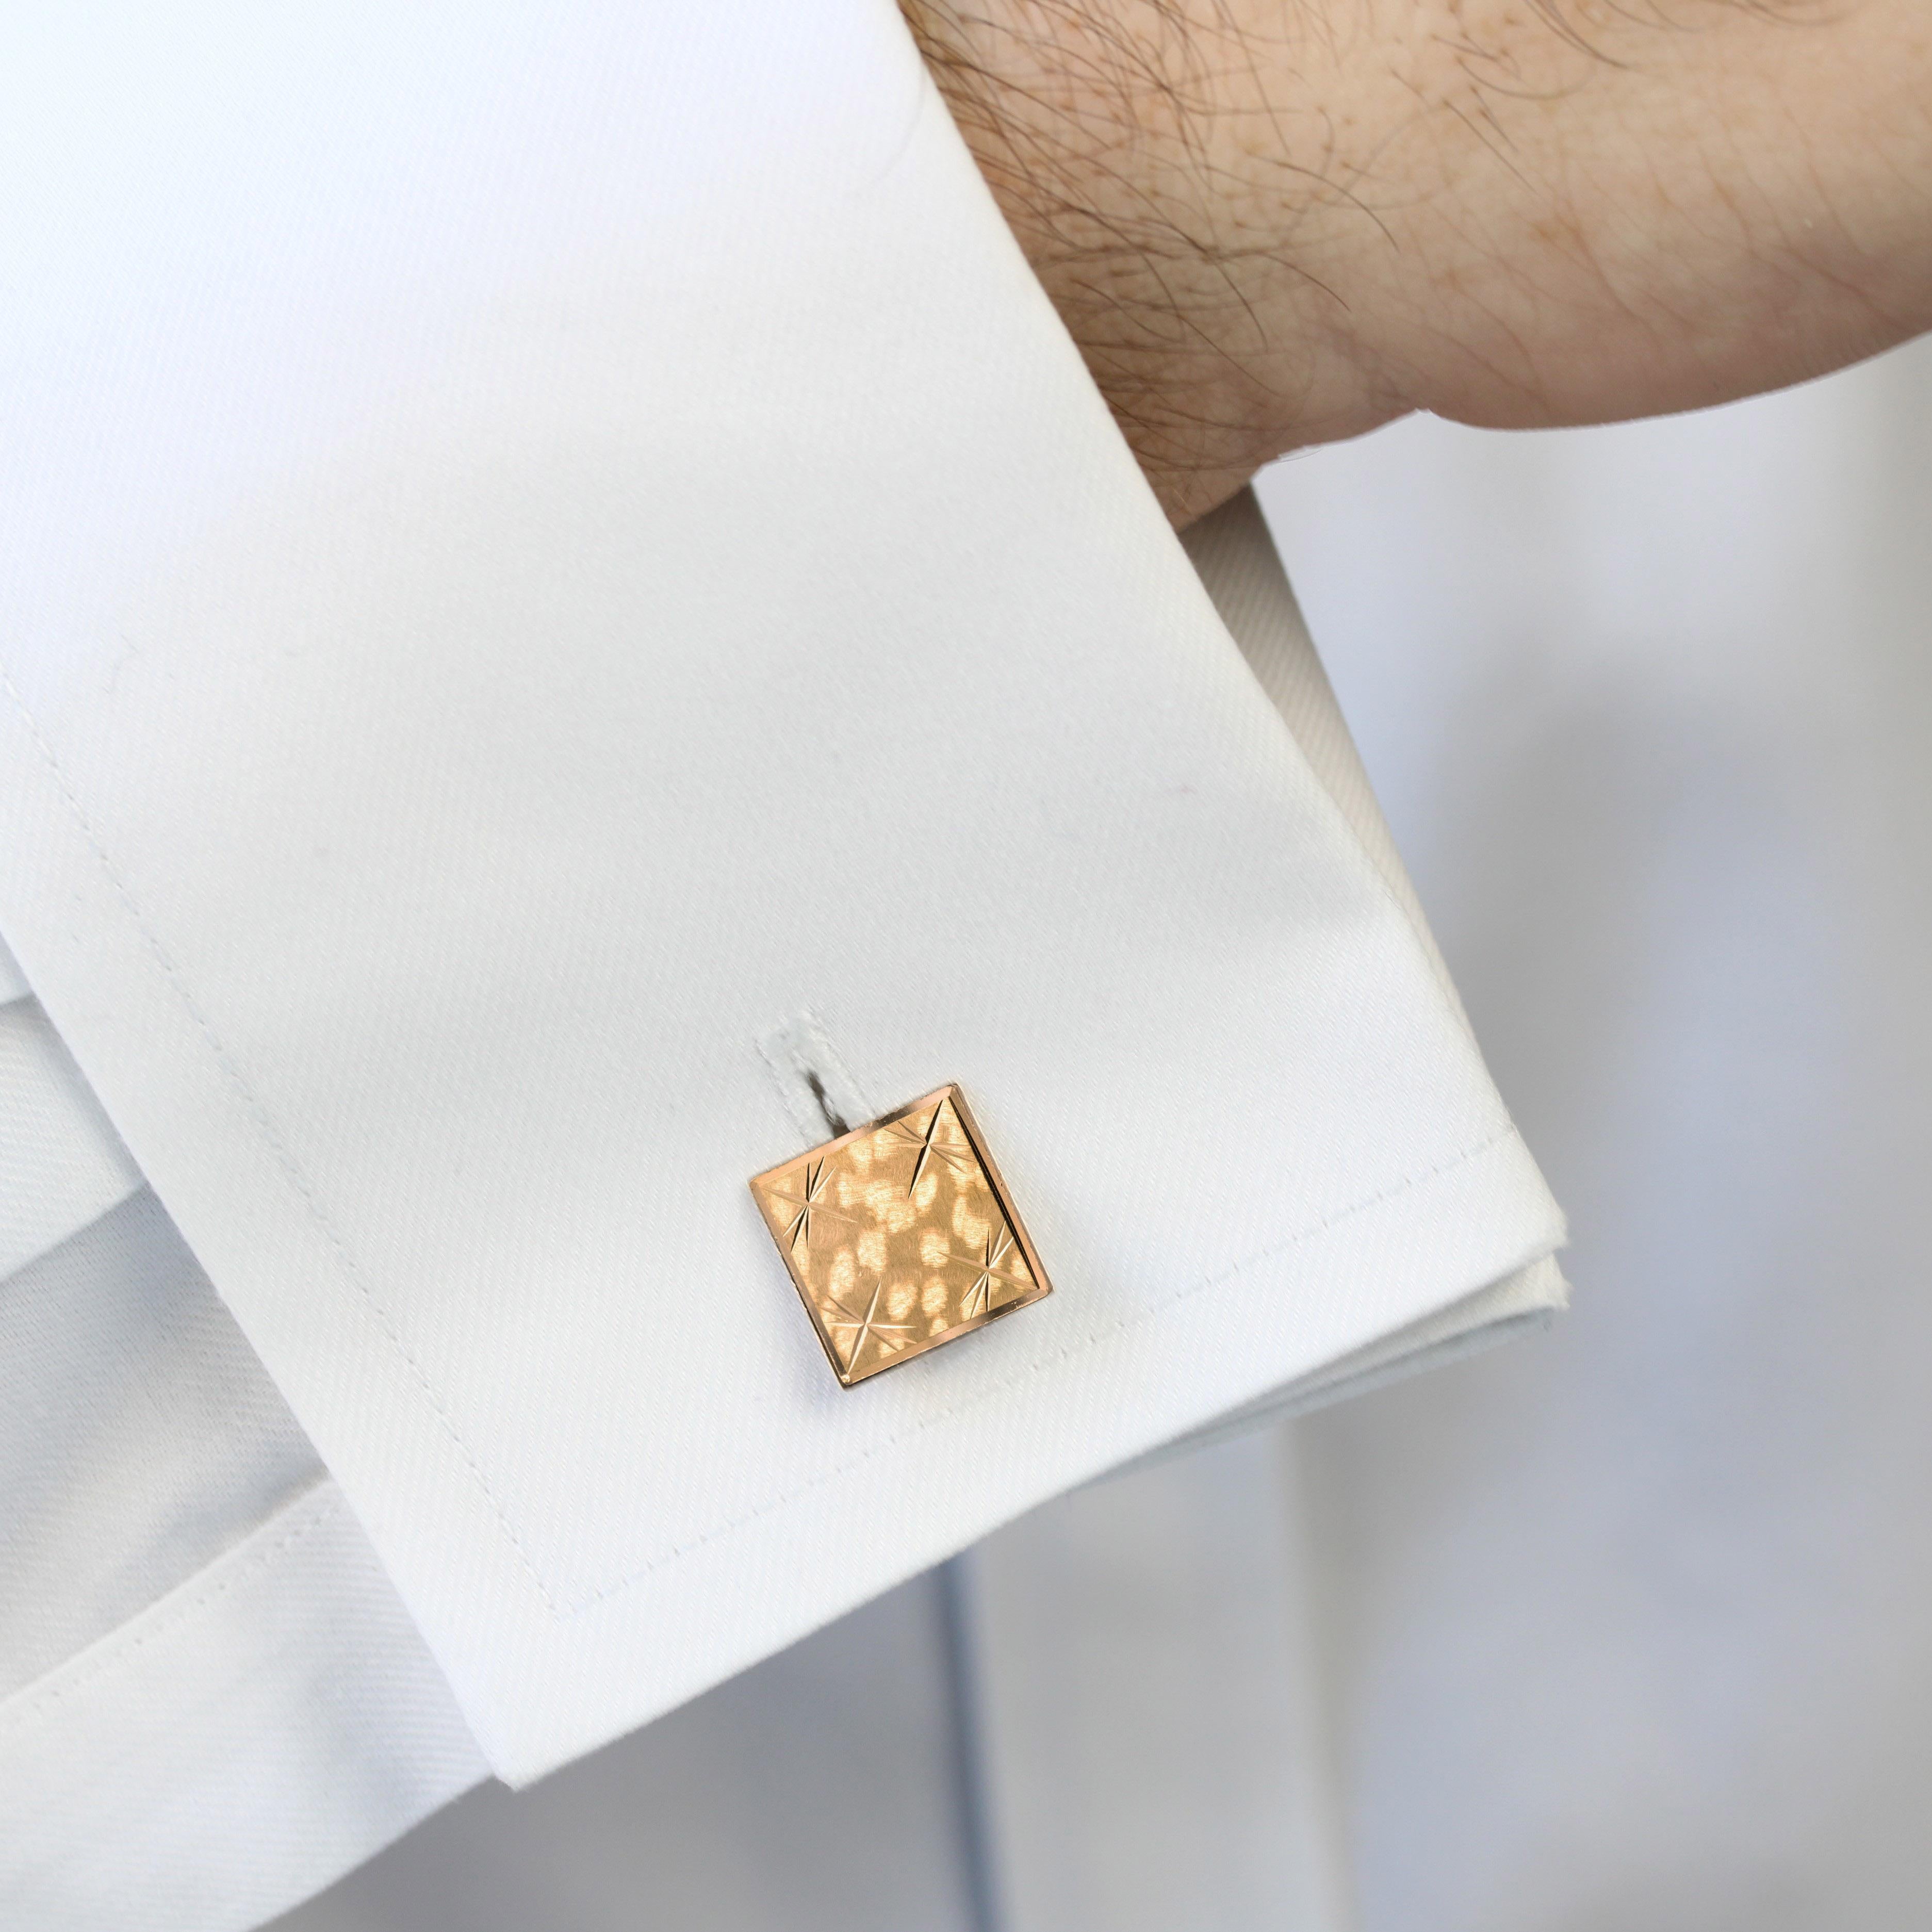 Pair of cufflinks in 18 karat yellow gold, eagle's head hallmark.
Square shaped, these retro cufflinks are chiseled with four stars on a matte background. The attachment system is an articulated stick.
Height : 12.8 mm, Width : 12.8 mm